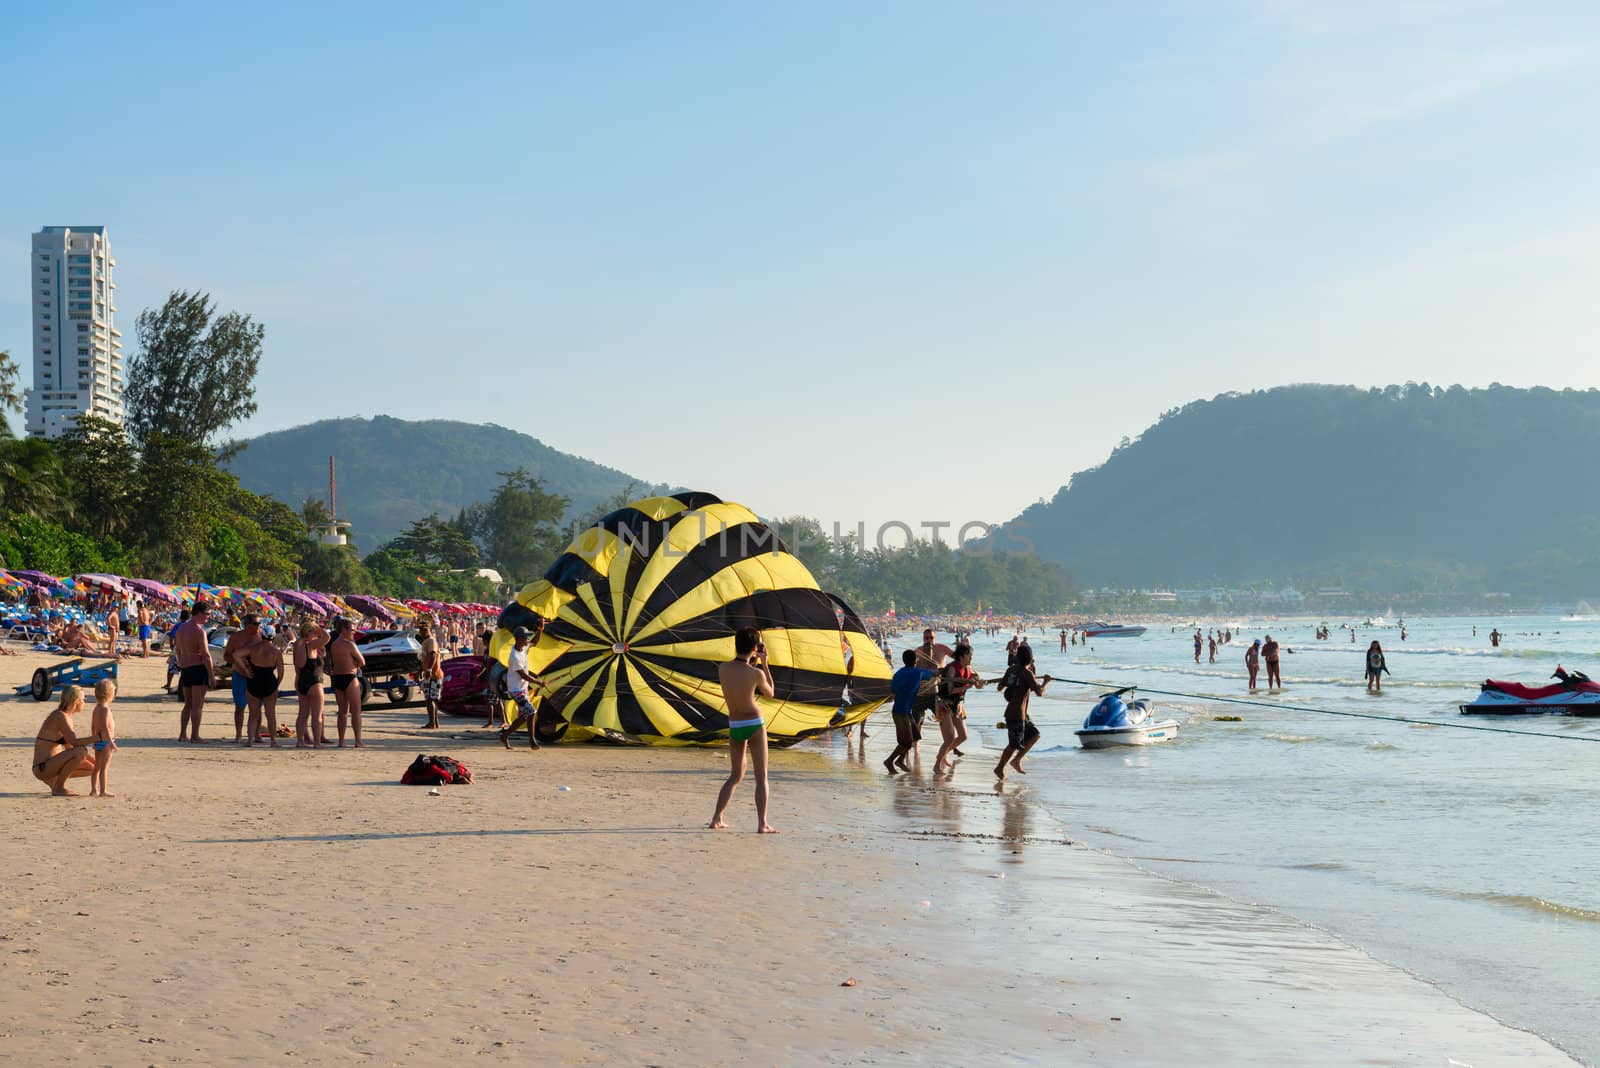 PHUKET, THAILAND - Jan 28: Crowded Patong beach with tourists on Jan 28, 2013 in Phuket, Thailand. Phuket is a famous winter destination for thousands of tourists. 